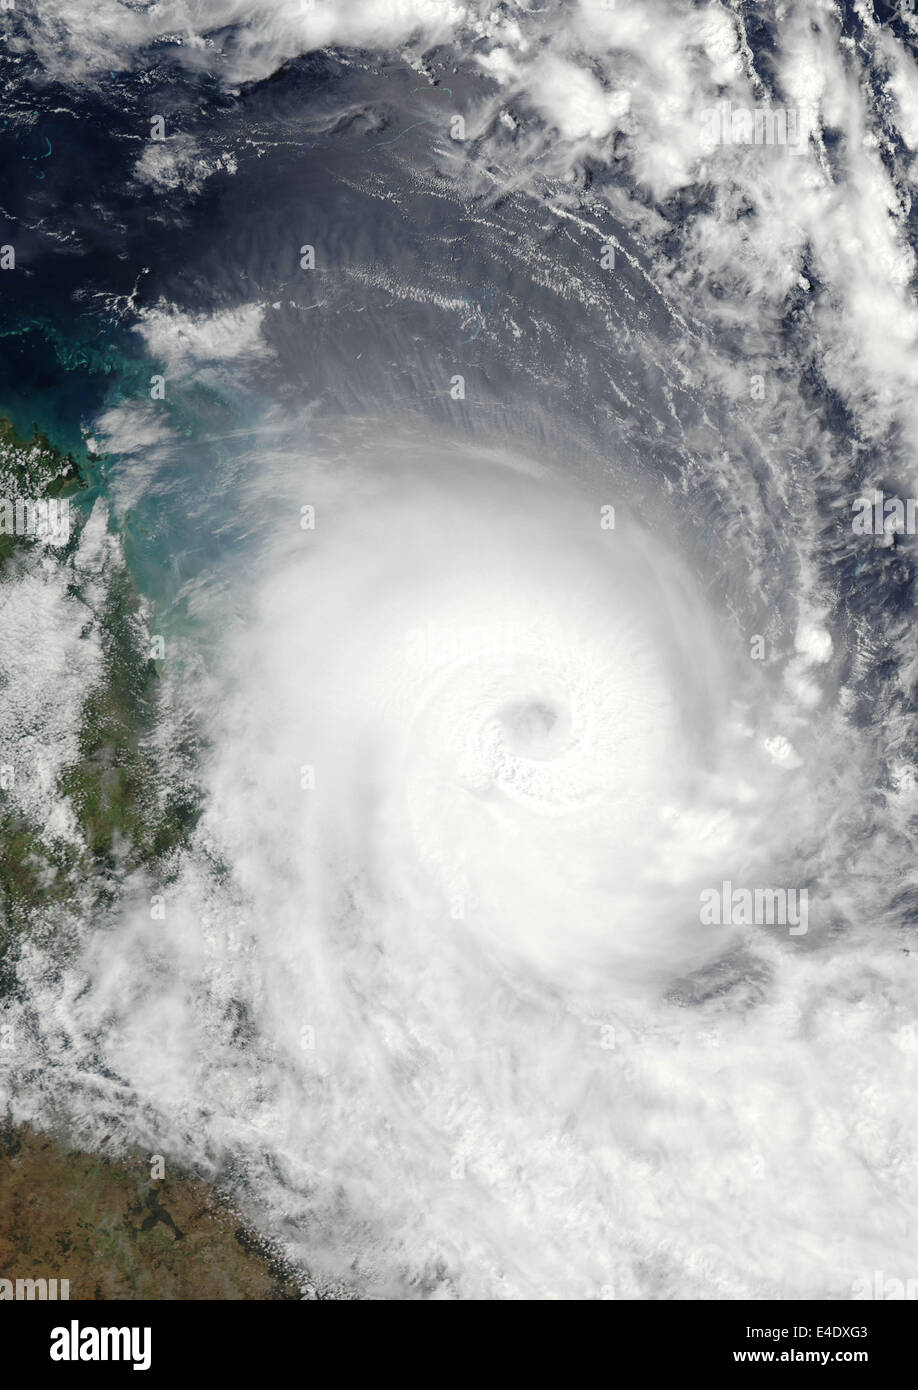 Cyclone Hamish, Australia, In 2009, True Colour Satellite Image. Tropical Cyclone Hamish over the Coral Sea just off the coast o Stock Photo